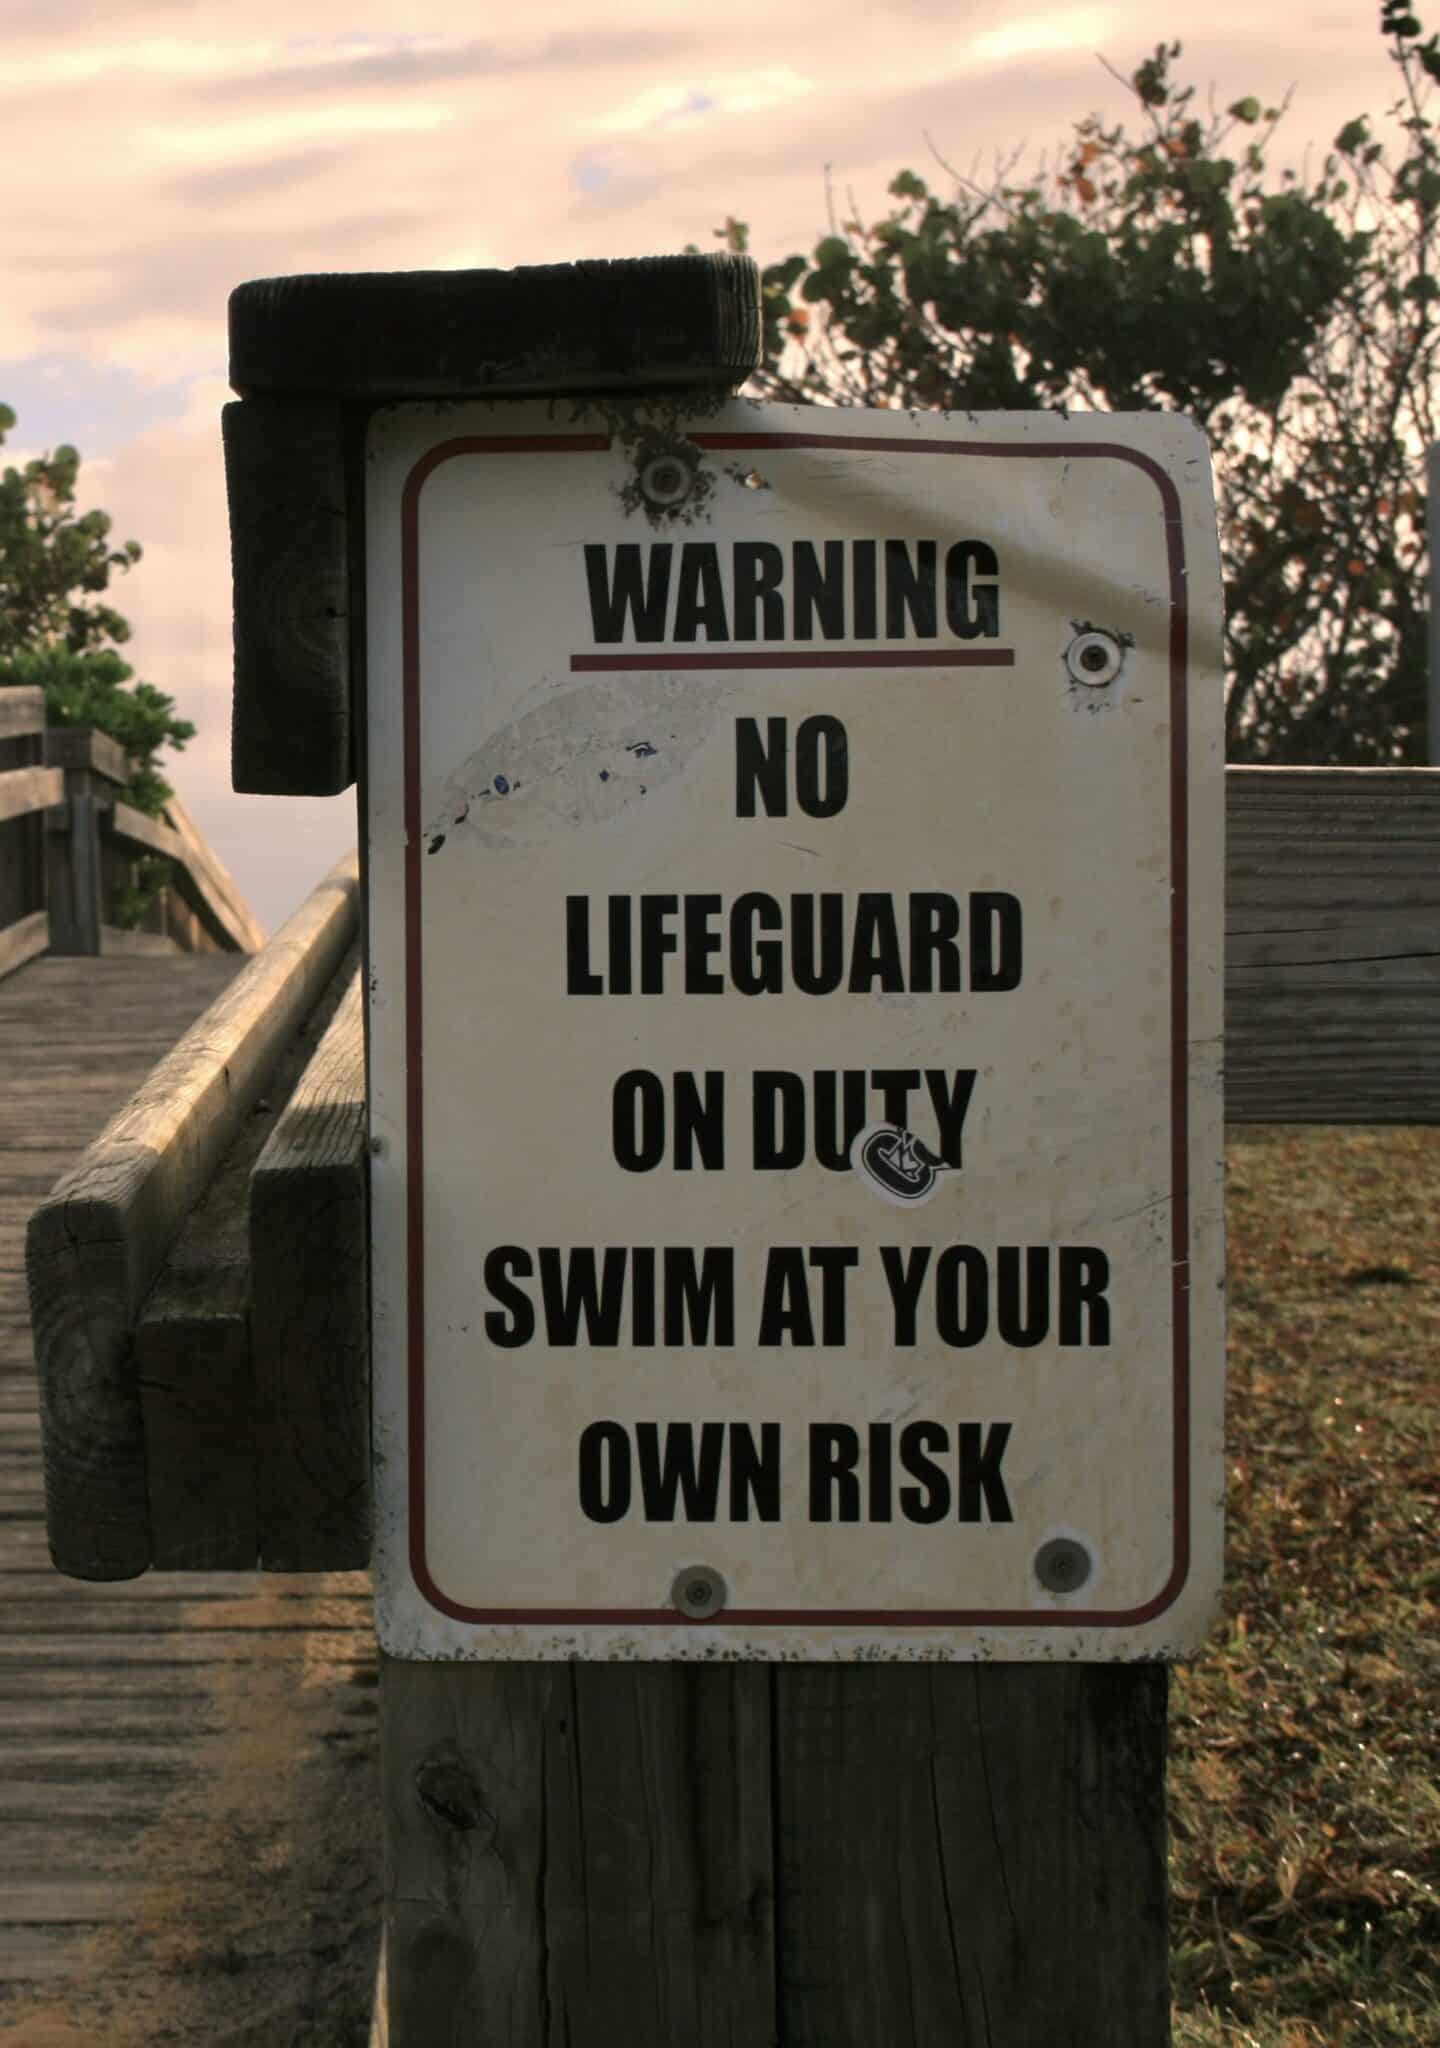 Liability disclaimer written on a white sign by a bridge, which says, "Warning-No lifeguard on duty. Swim at your own risk."